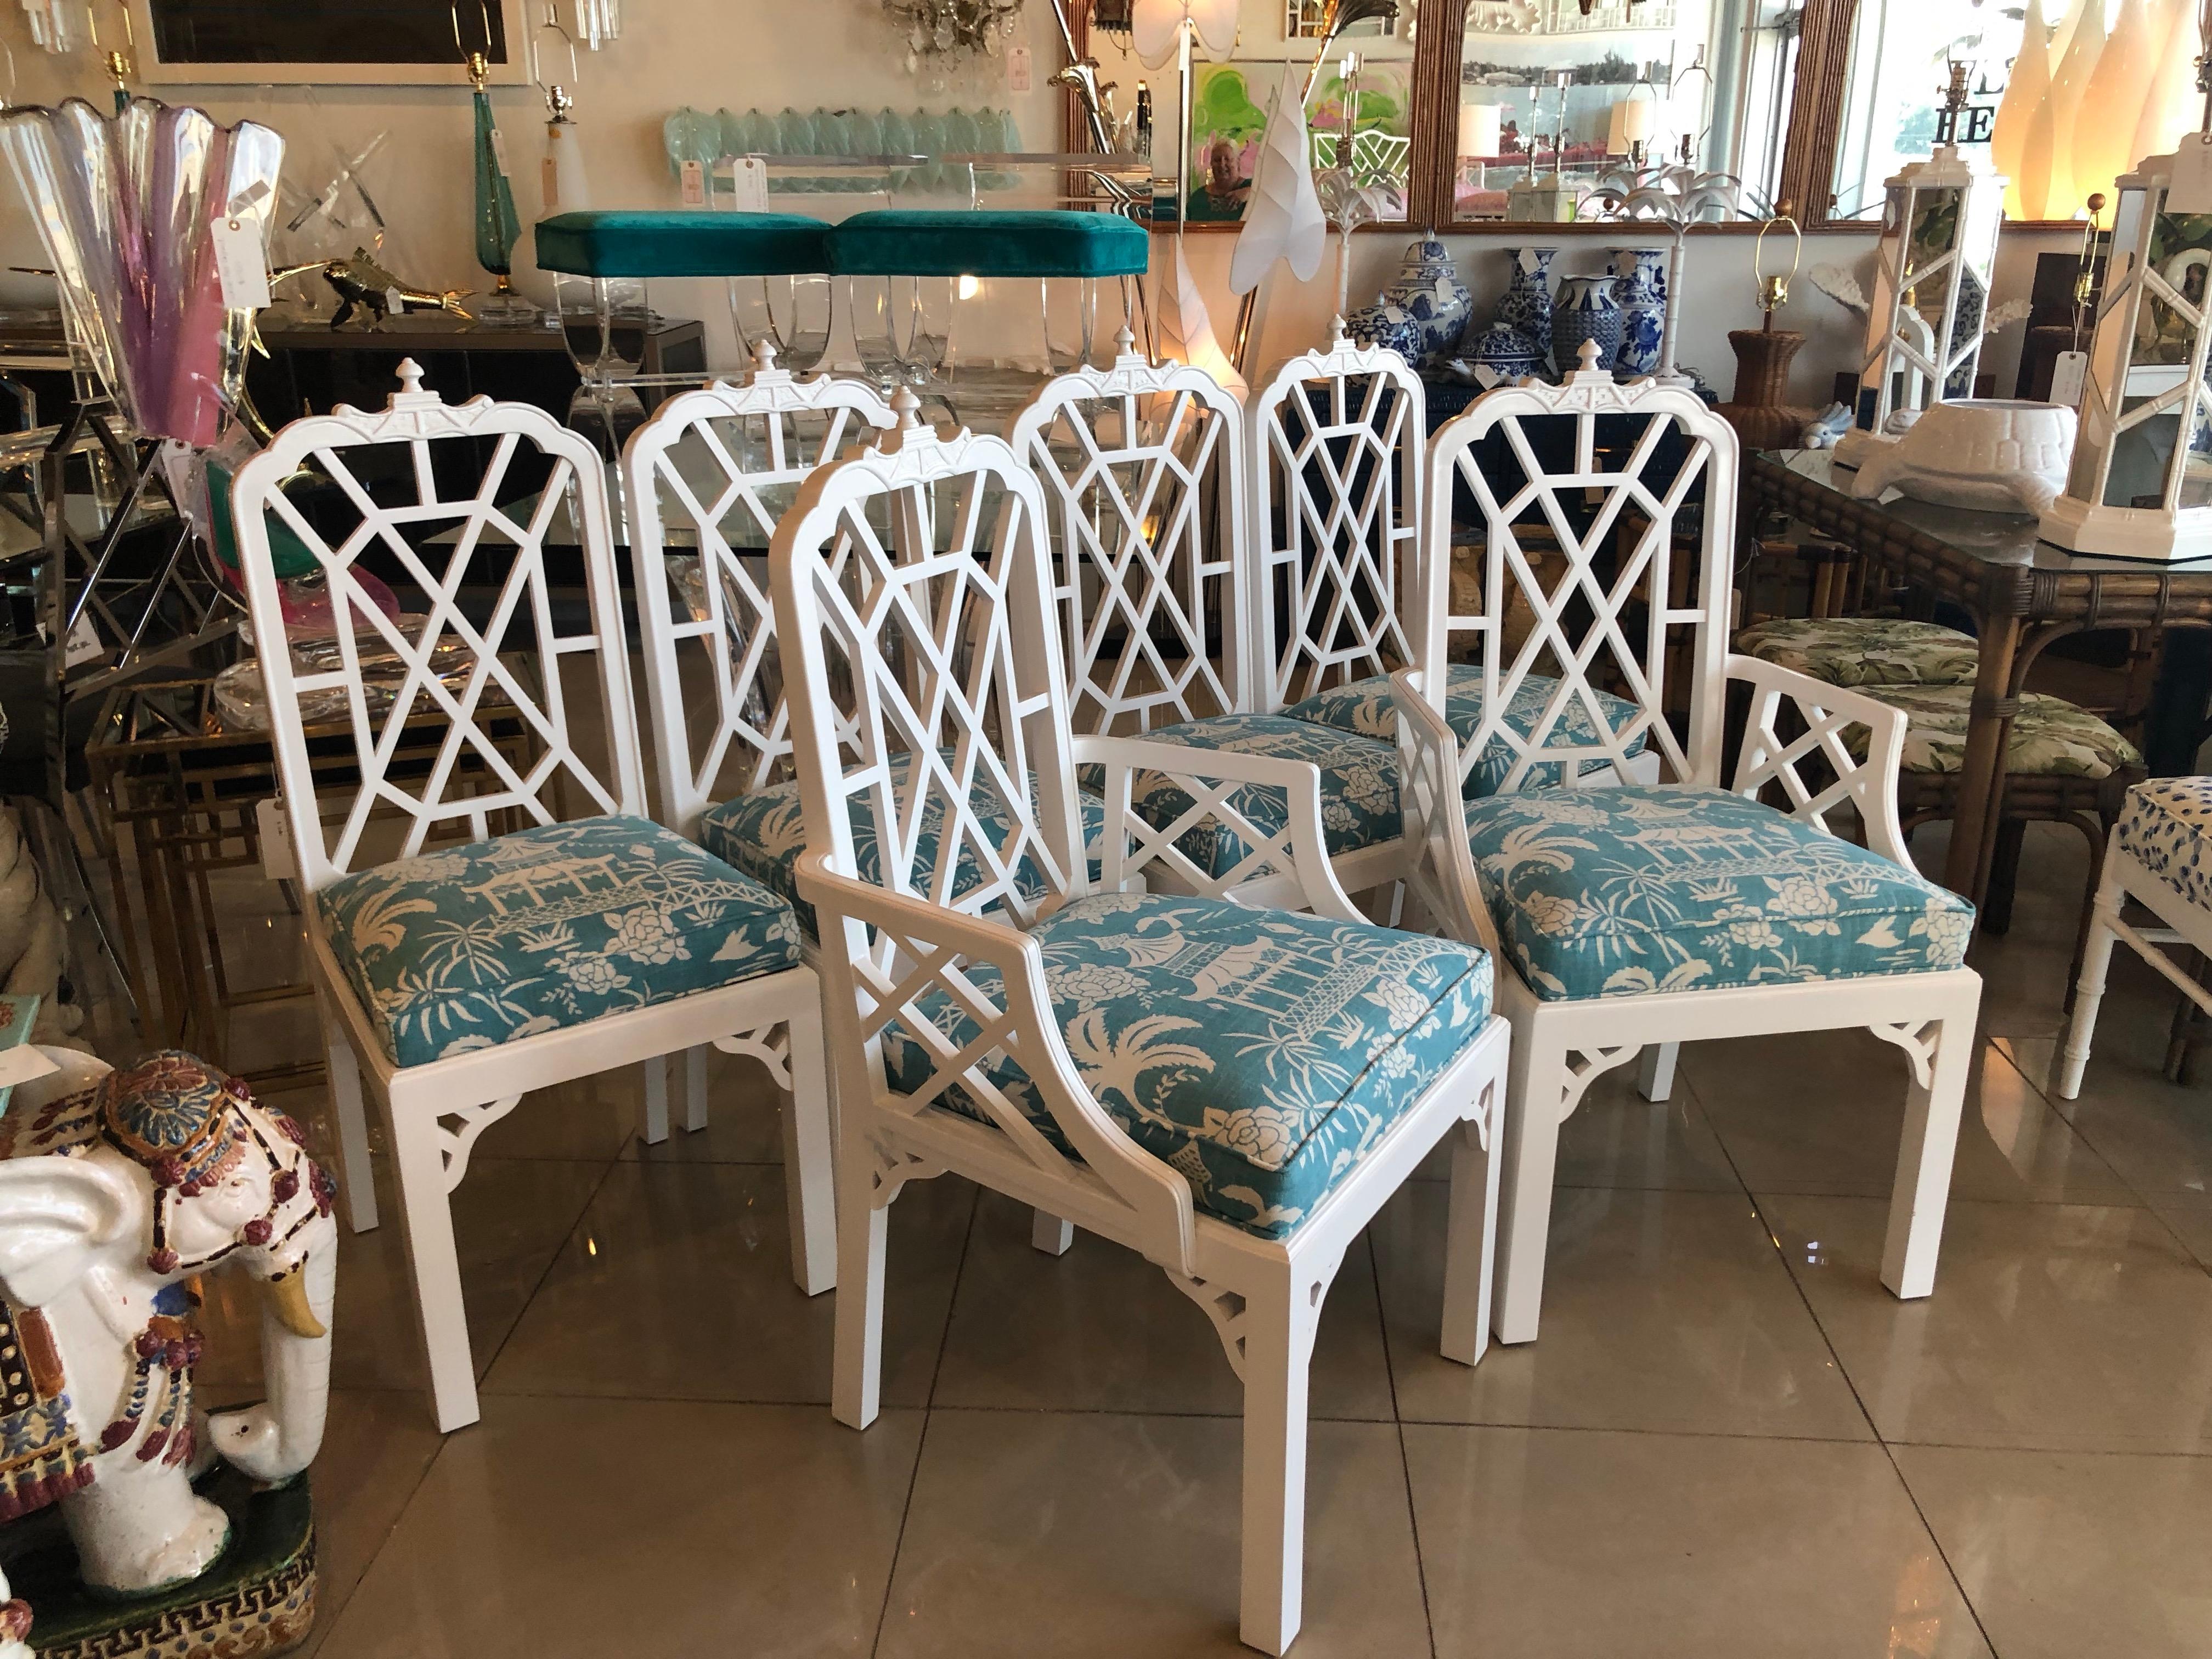 Beautiful set of 6 vintage Chinese Chippendale chinoiserie Pagoda dining chairs. These have been newly professionally lacquered in a wide gloss. New upholstery and new foam as well. This set includes 2 arm chairs and 4 side chairs. Please see below